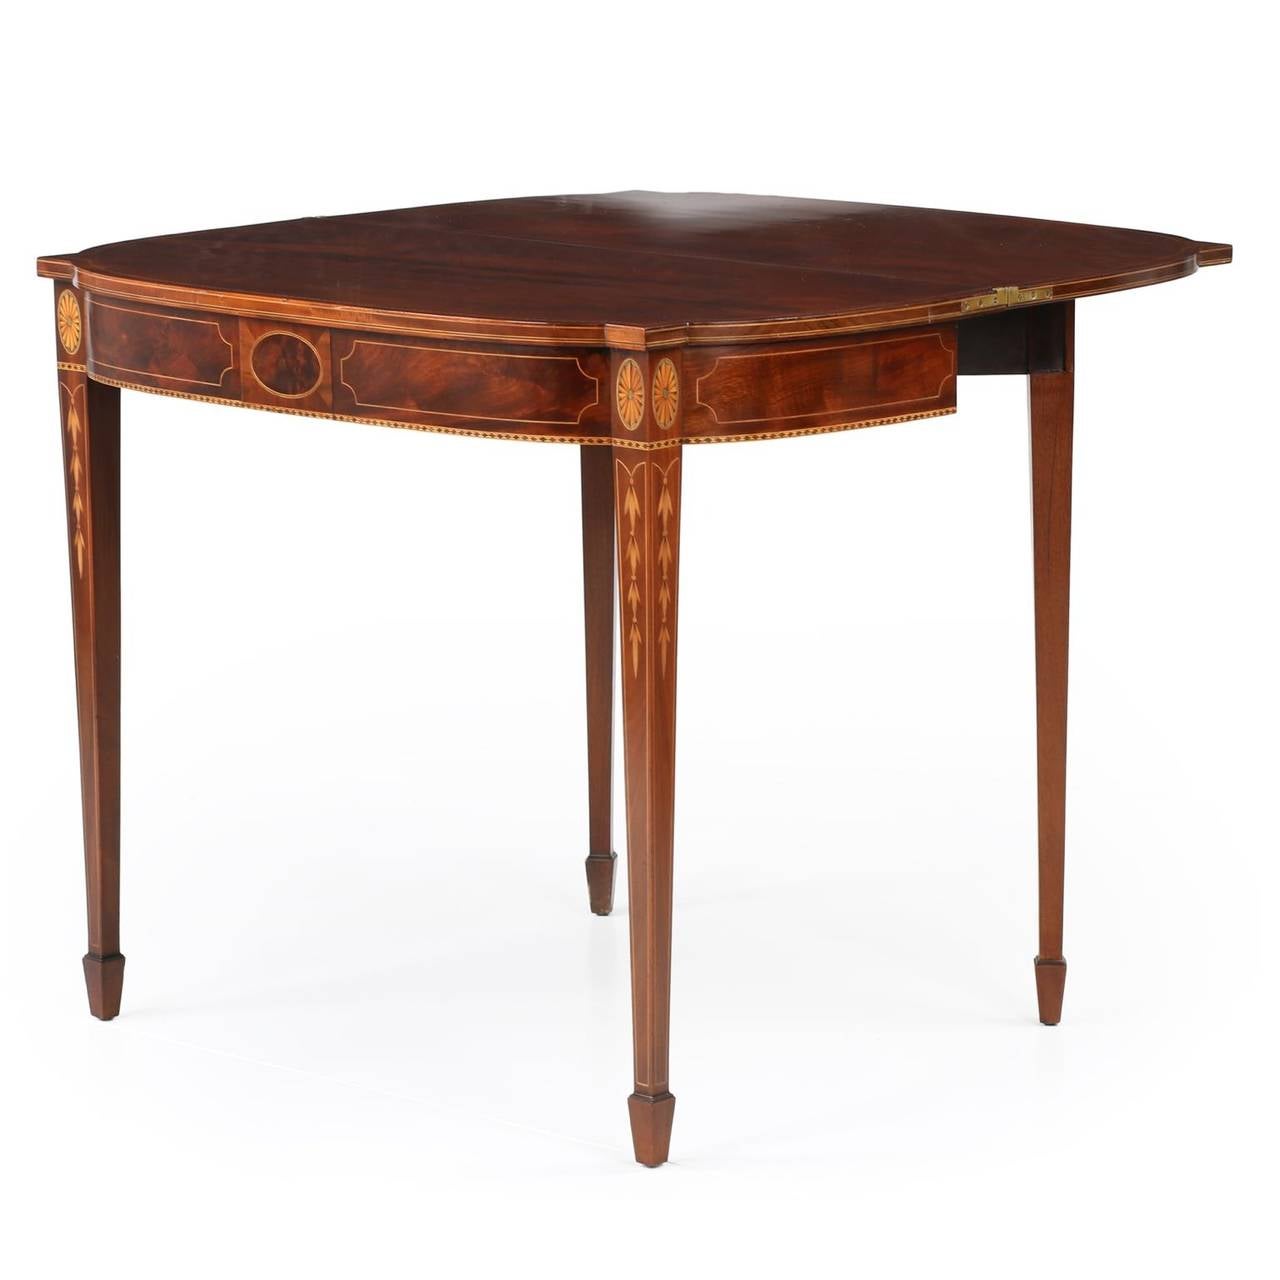 A very fine reproduction of the c. 1810 originals of Baltimore, Maryland and the surrounding counties, this excellent card table exhibits all of the best attributes of the period in it's entirely hand crafted body.  Early 20th Century works by